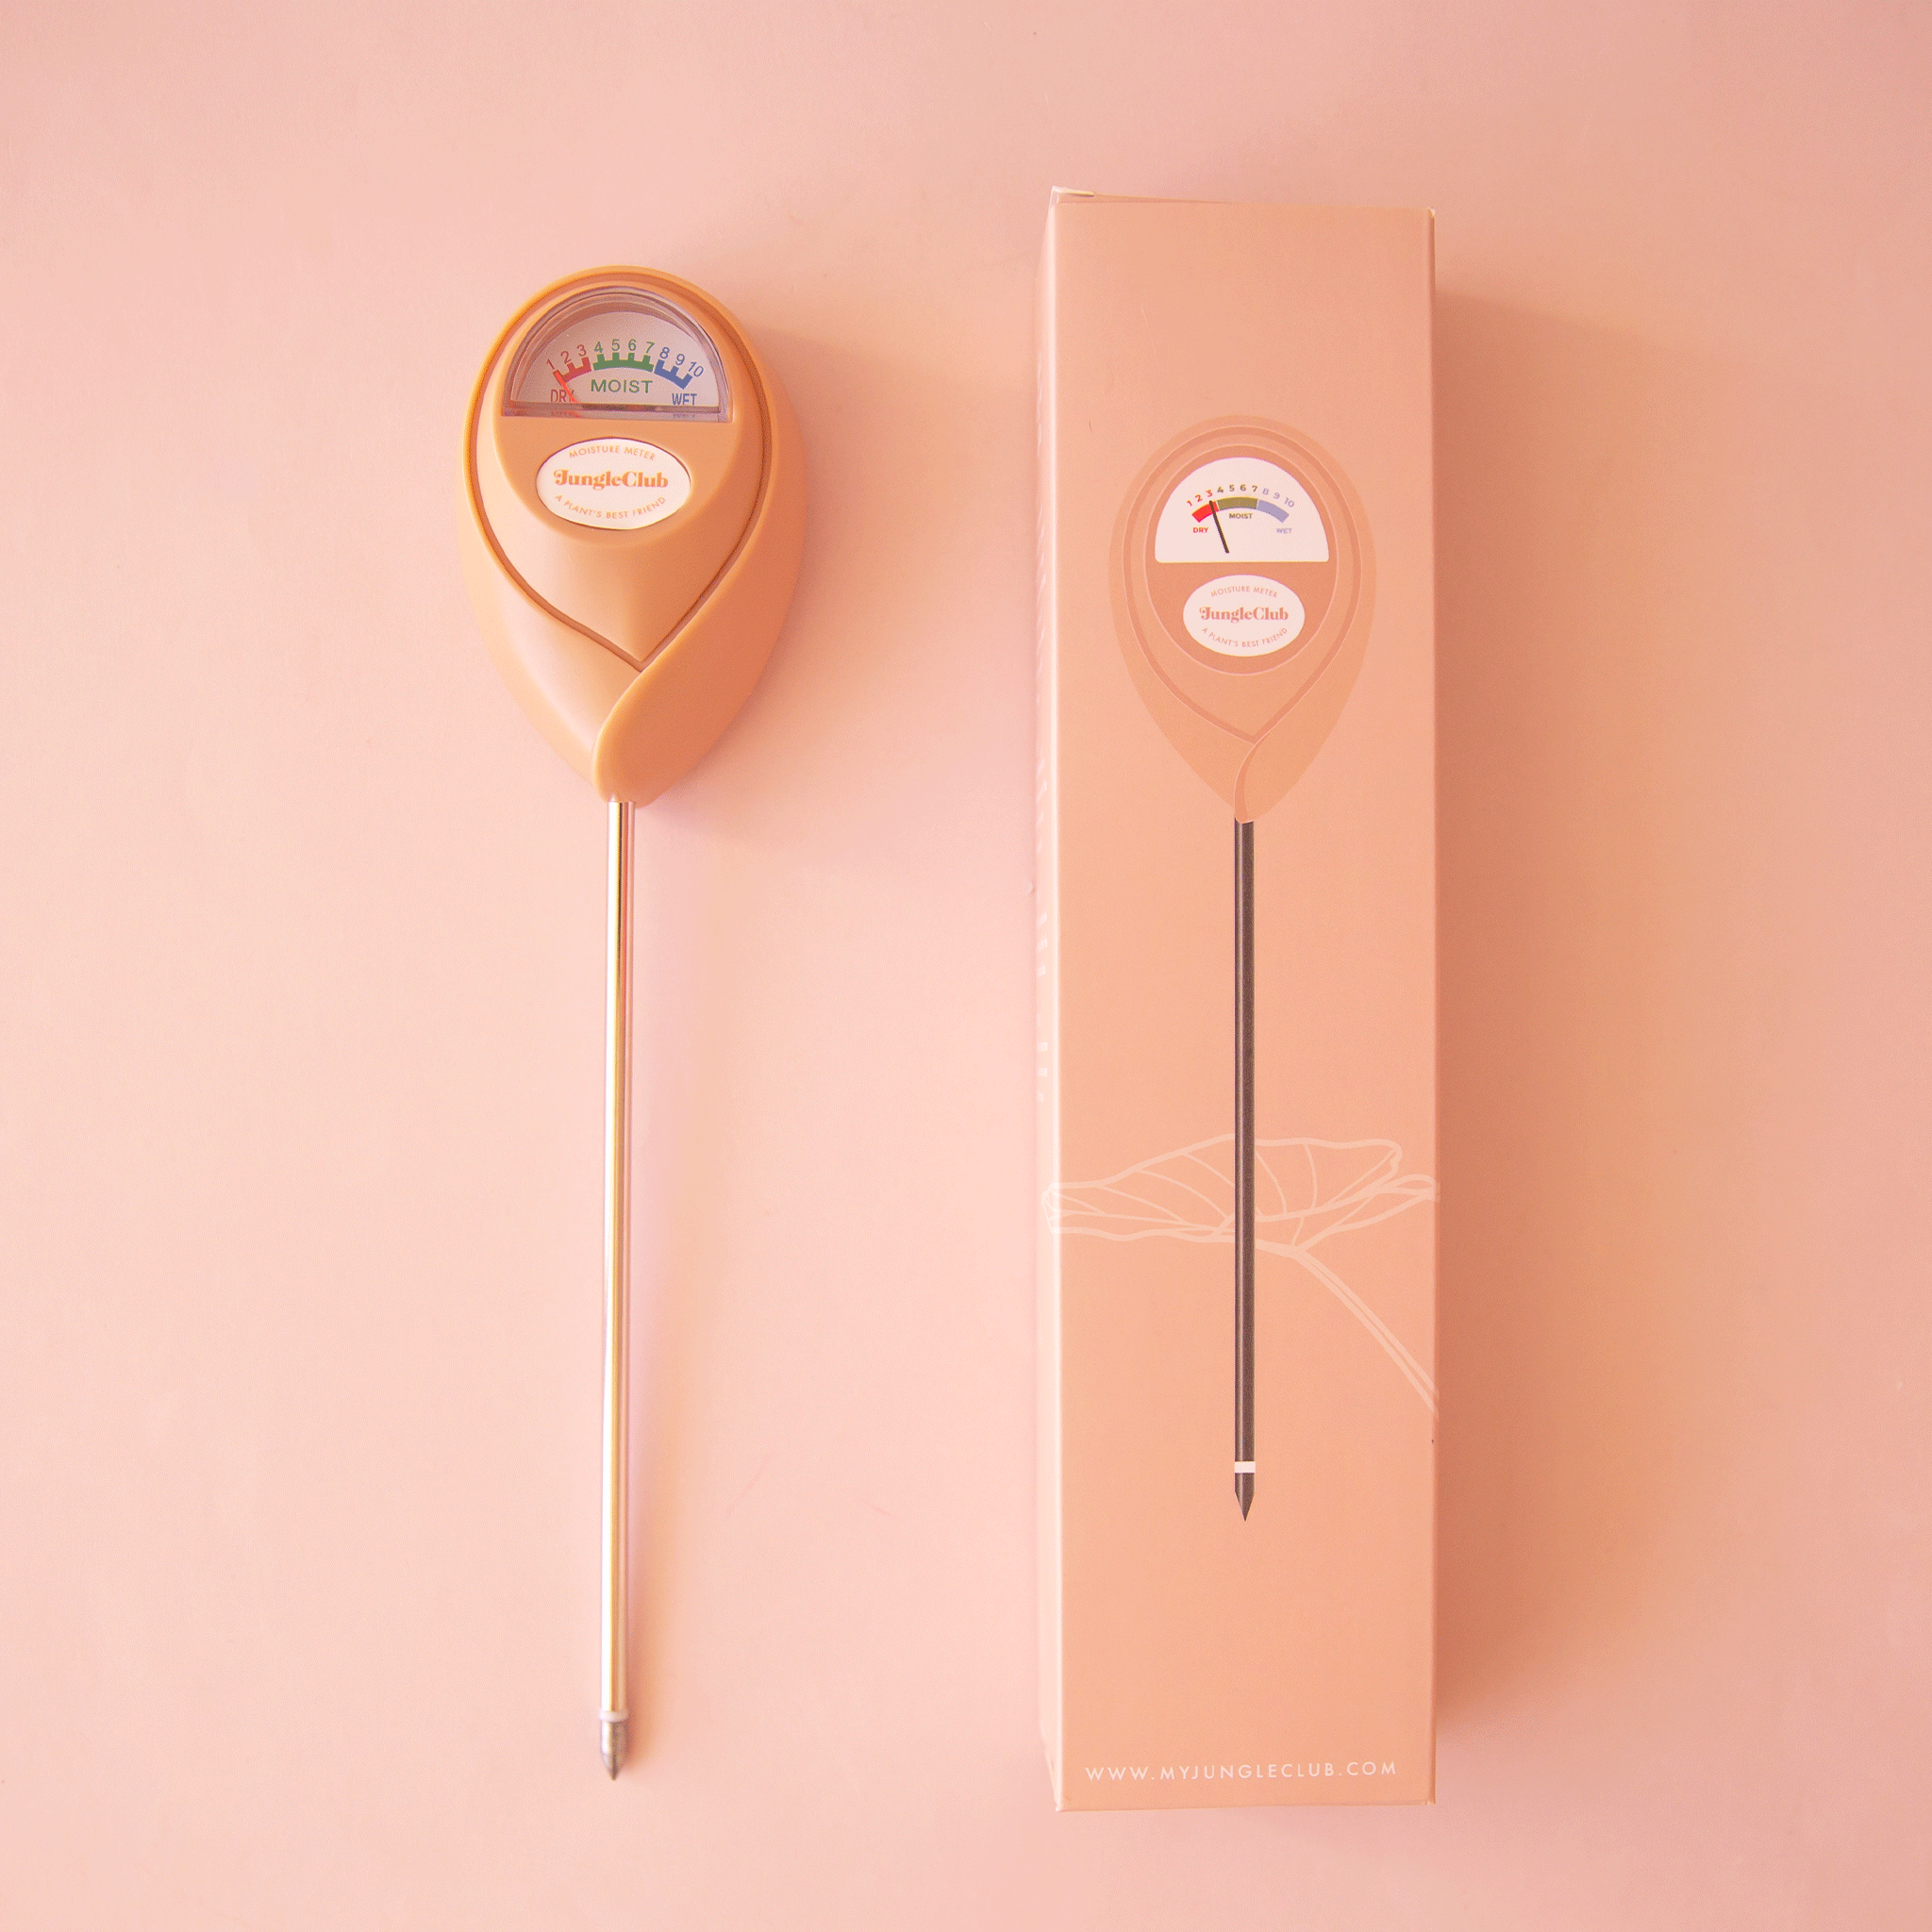 A pink moisture meter with a rounded head and a white meter that ranges from dry, moist, or wet along with a small oval label in the front that reads, &quot;Jungle Club&quot;.